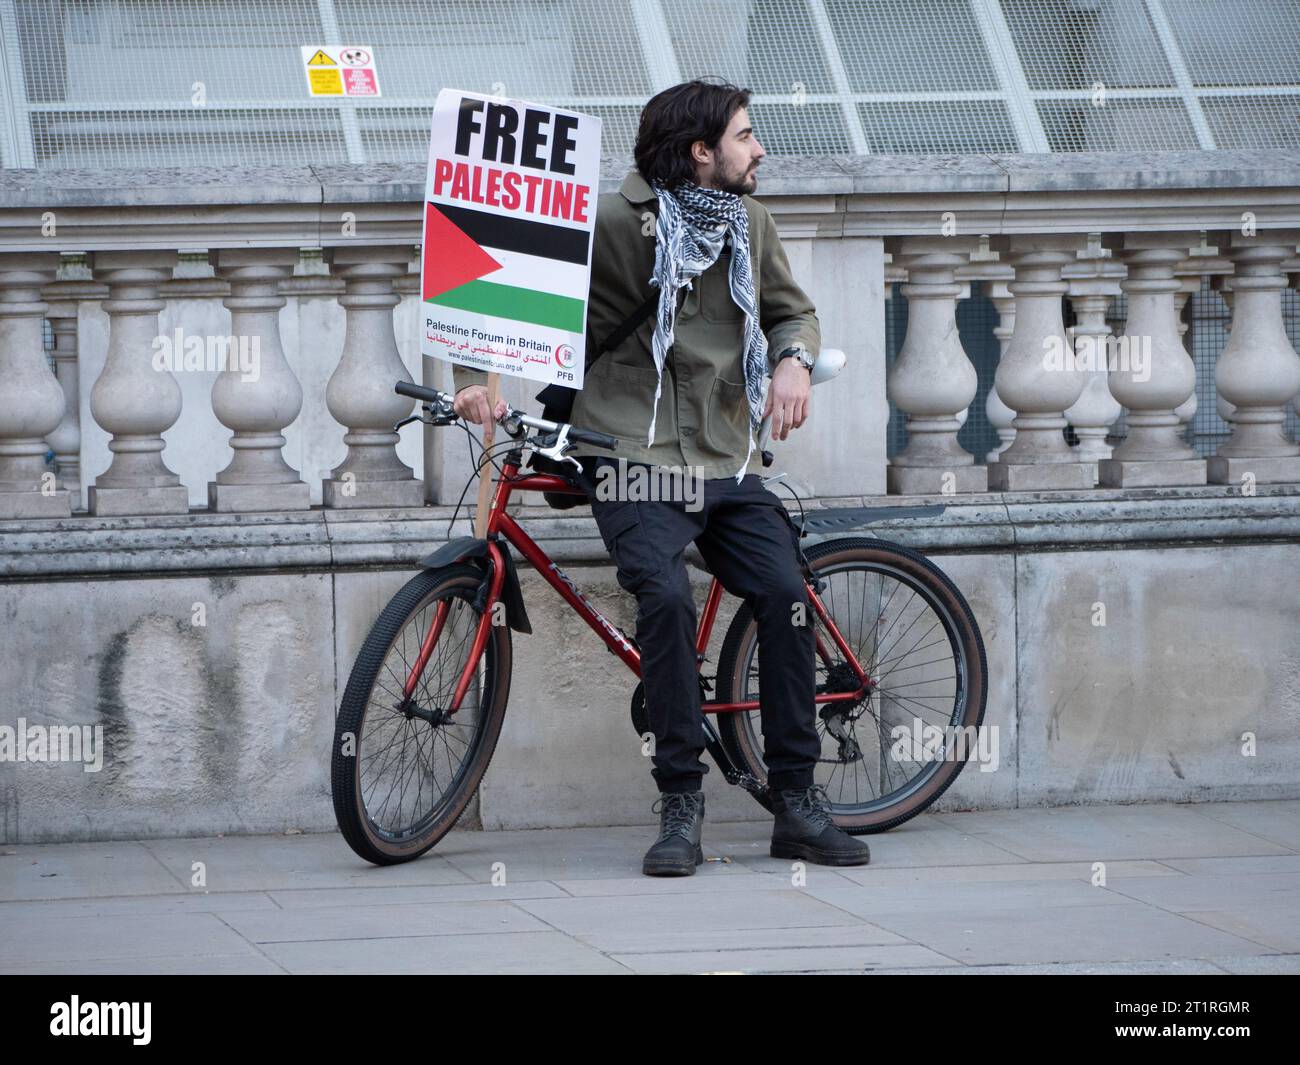 Pro-Palestinian marchers with Free Palestine poster sitting on bike  in Westminster London, UK, at the Palestine Solidarity Campaign demonstration, march to protest about the Israel Palestine confict over the Gaza Strip Stock Photo